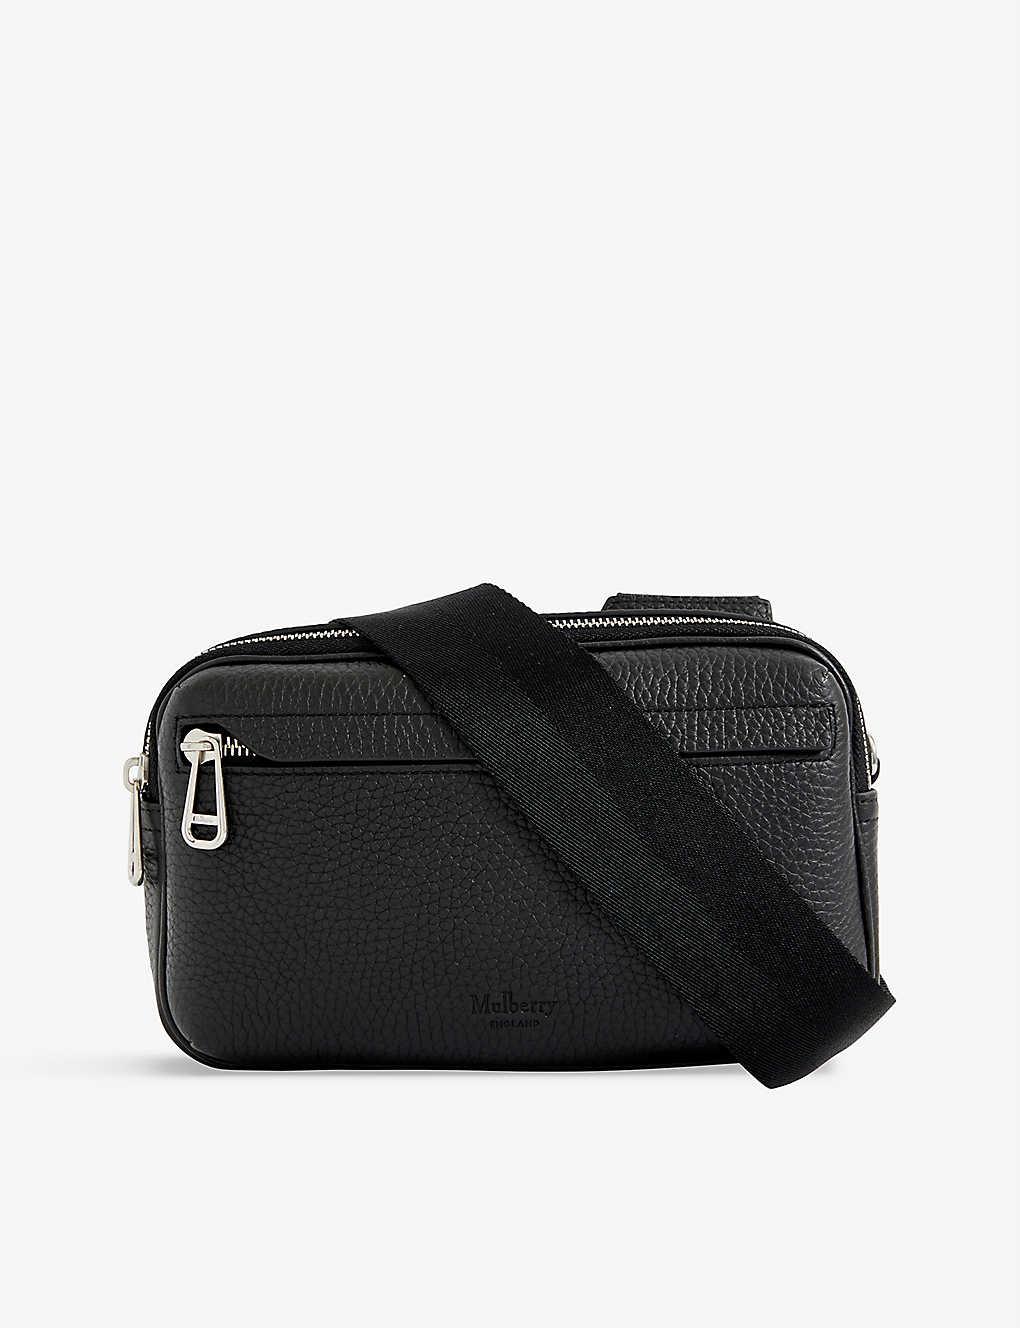 Mulberry Postman's Buckle Reporter Leather Cross-body Bag in Black | Lyst